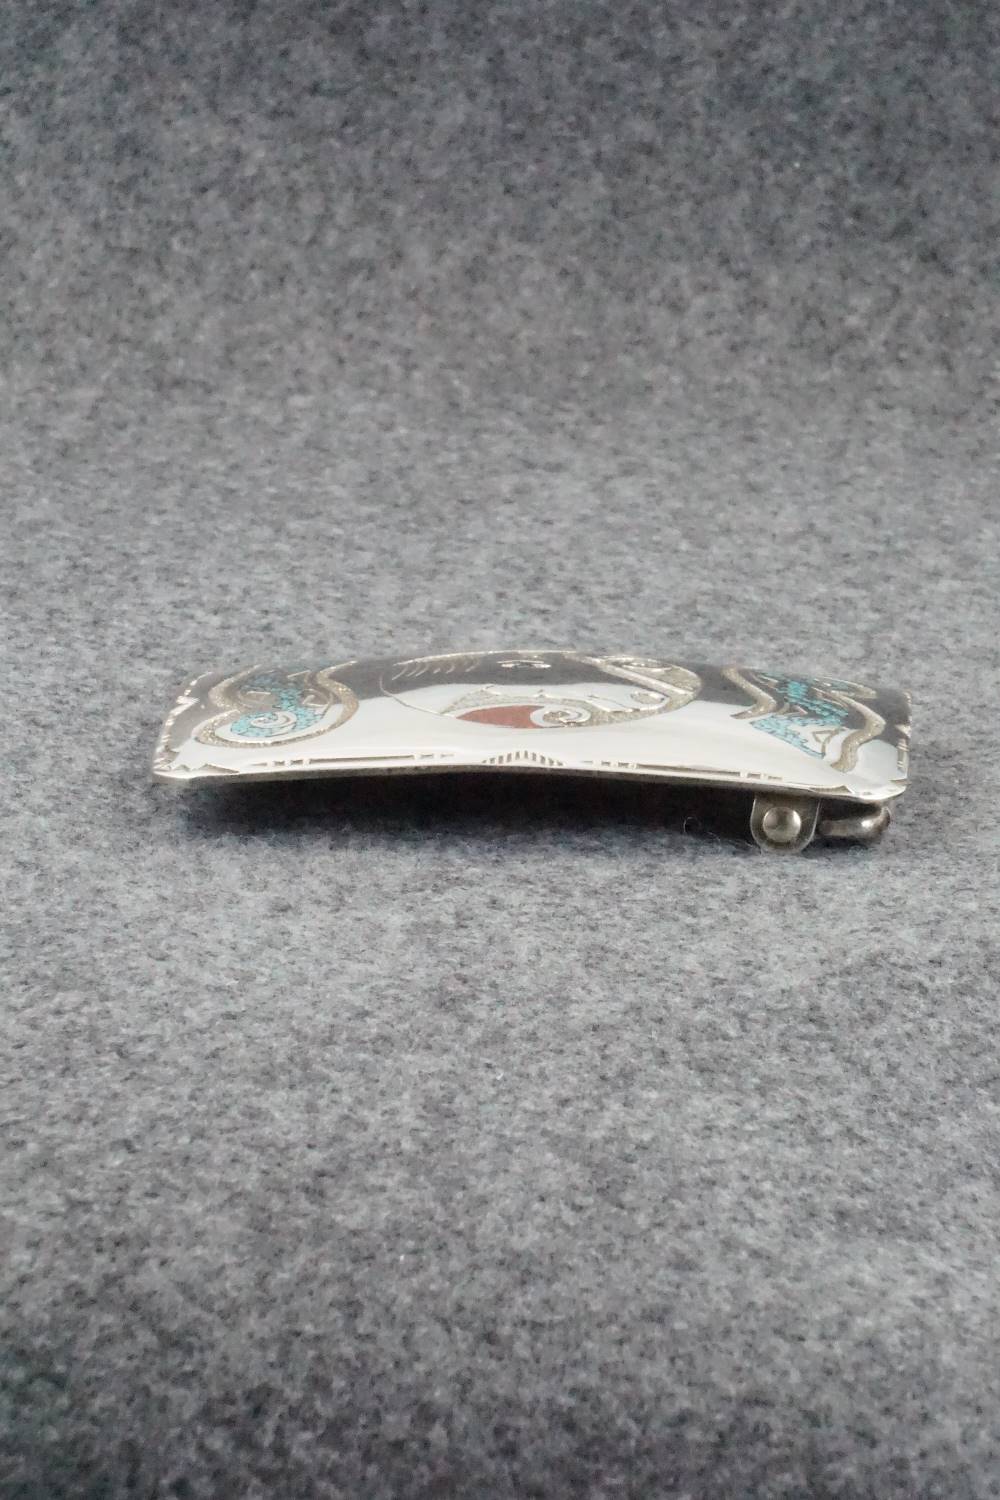 Turquoise, Coral and Sterling Silver Belt Buckle - Raymond Begay